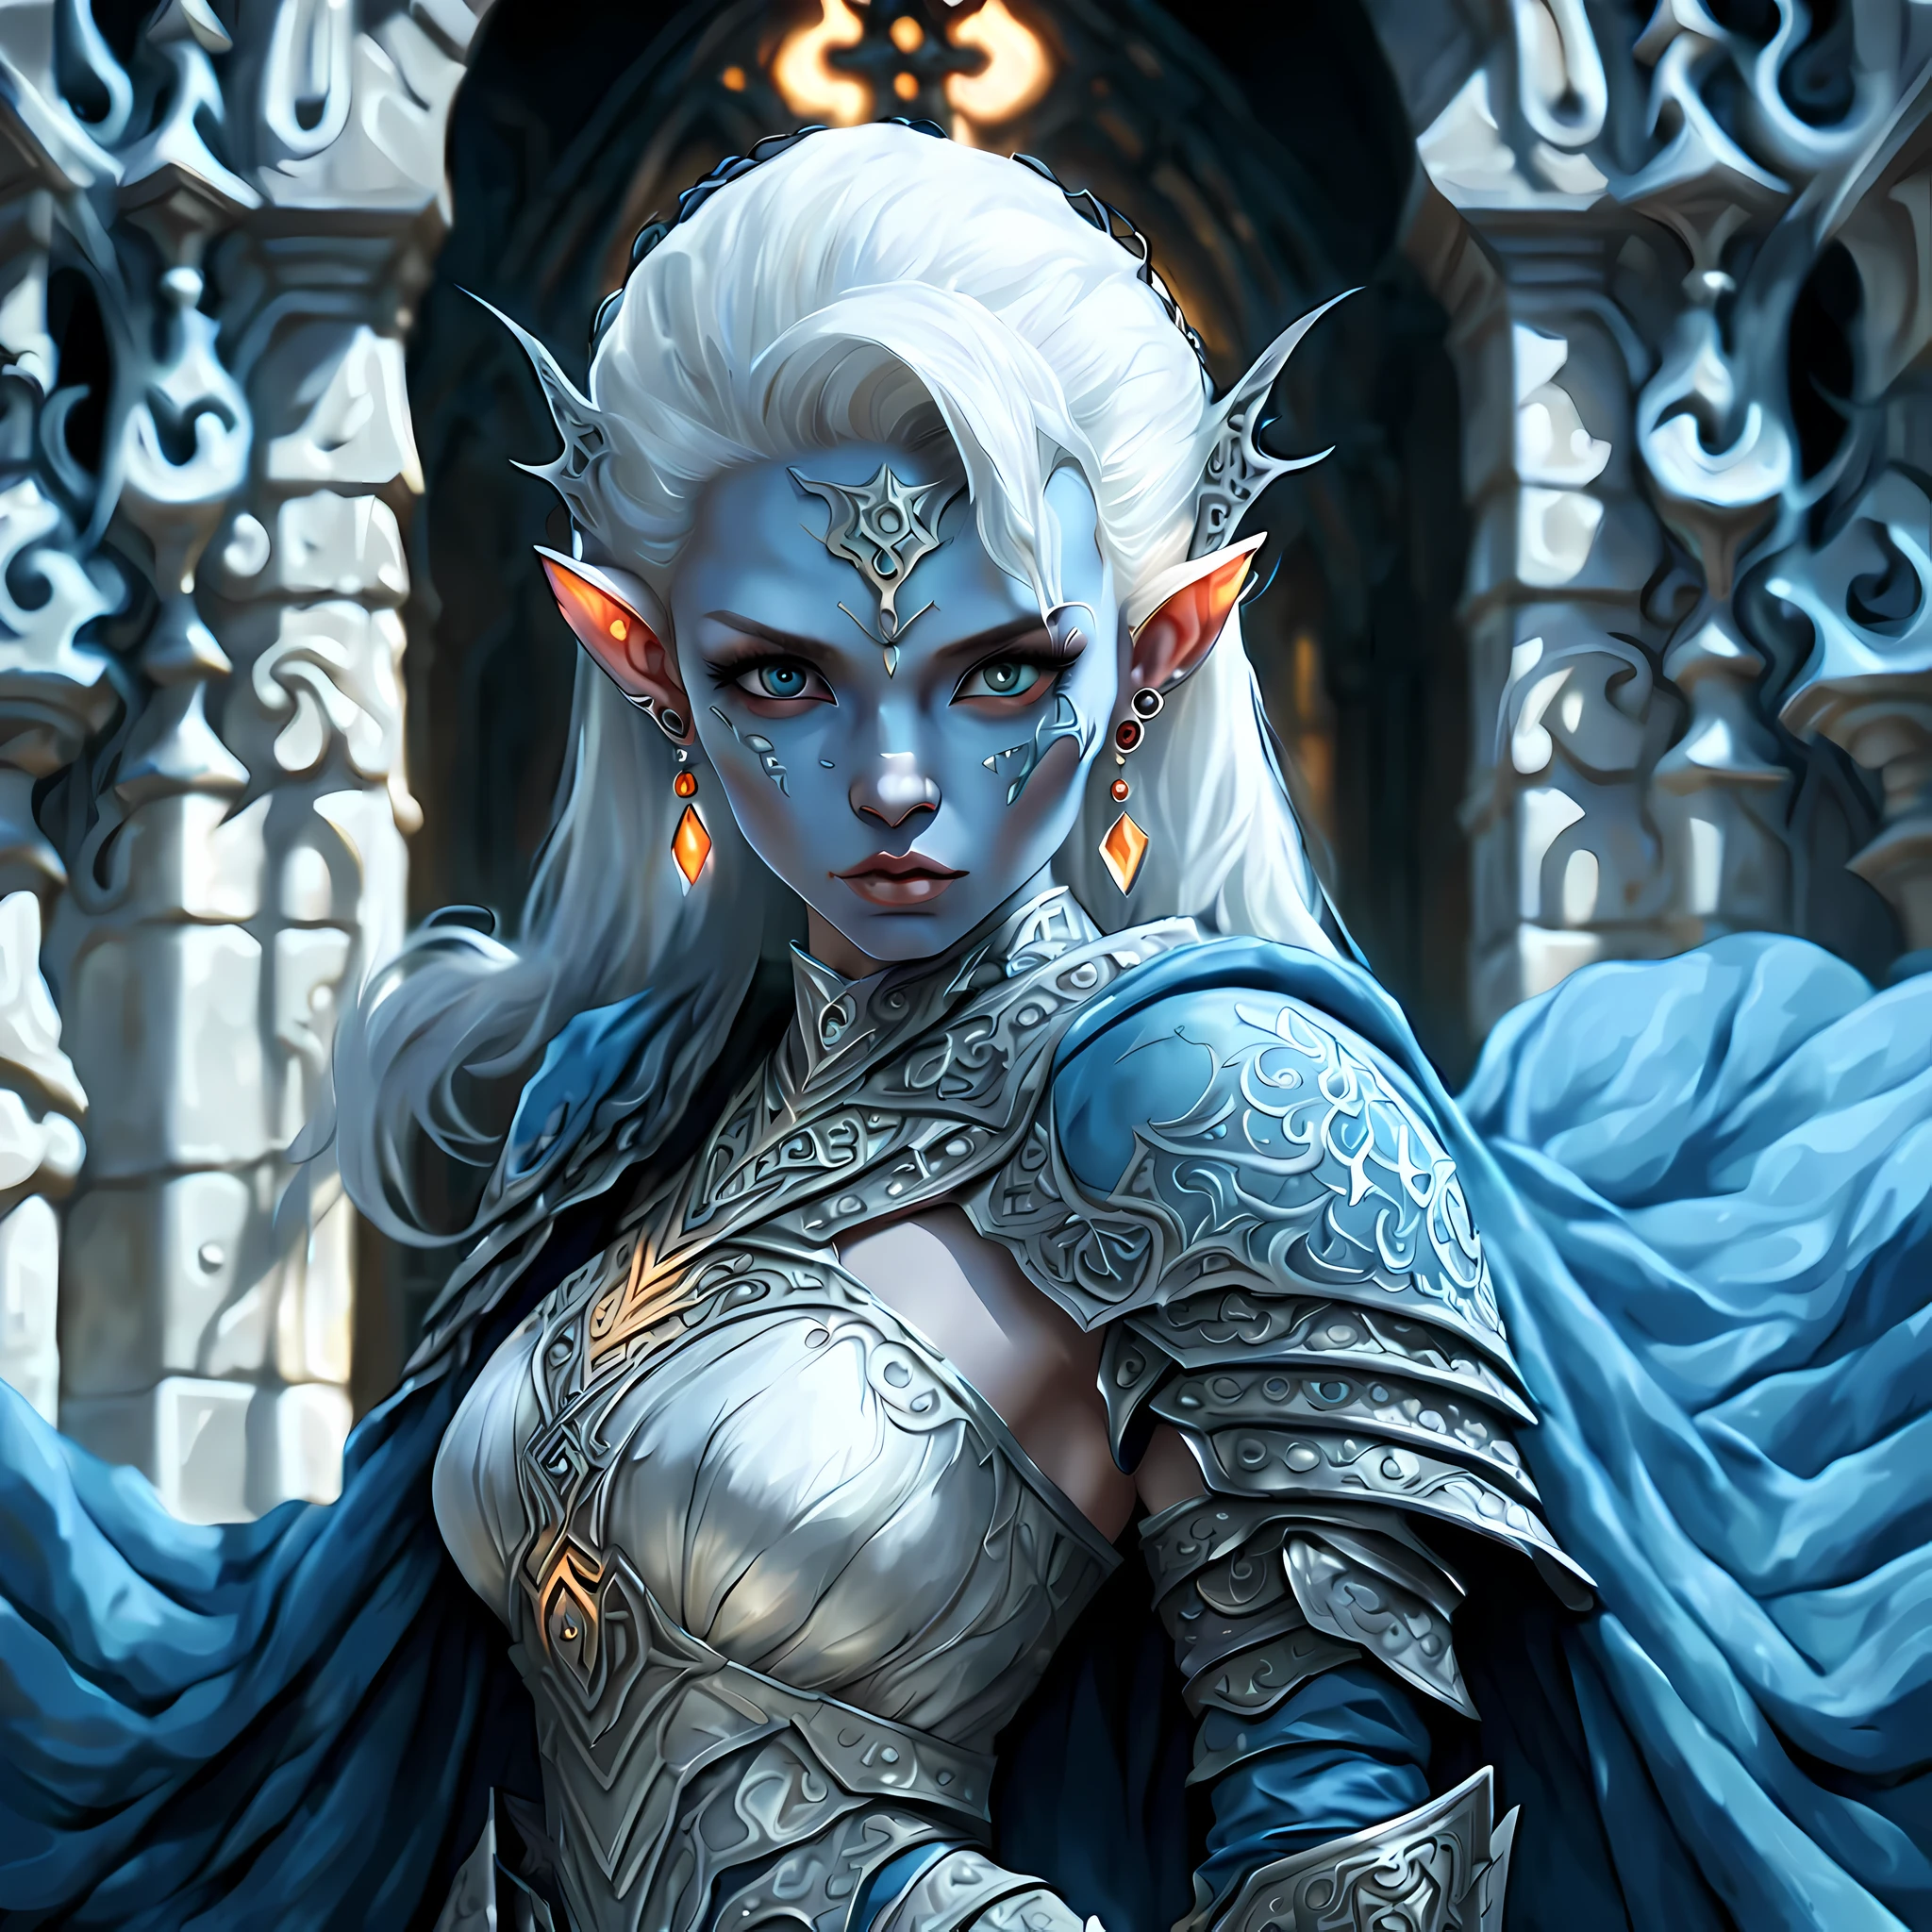 fAntAsy Art, dnd Art, RPG Art, 广角镜头, (mAsterpiece: 1.4) A (portrAit: 1.3) intense detAils, highly detAiled, photoreAlistic, best quAlity, 高分辨率, portrAit A femAle (fAntAsy Art, MAsterpiece, best quAlity: 1.3) ((蓝色的 skin: 1.5)), intense detAils fAciAl detAils, exquisite beAuty, (fAntAsy Art, MAsterpiece, best quAlity) 牧师, (蓝色的: 1.3) skinned femAle, (白色的 hAir: 1.3), bAld heAd (绿色的: 1.3) 眼睛, fAntAsy Art, MAsterpiece, best quAlity) Armed A fiery sword red fire, weAring heAvy (白色的: 1.3) hAlf plAte mAil Armor, weAring high heeled lAced boots, weAring An(orAnge :1.3) cloAk, weAring glowing holy symbol GlowingRunes_黄色的, within fAntAsy temple bAckground, Action shot reflection light, high detAils, best quAlity, 16千, [ultrA detAiled], mAsterpiece, best quAlity, (extremely detAiled), 特写, ultrA 广角镜头, photoreAlistic, 生的, fAntAsy Art, dnd Art, fAntAsy Art, reAlistic Art,((best quAlity)), ((mAsterpiece)), (detAiled), perfect fAce, ((no eArs: 1.6))